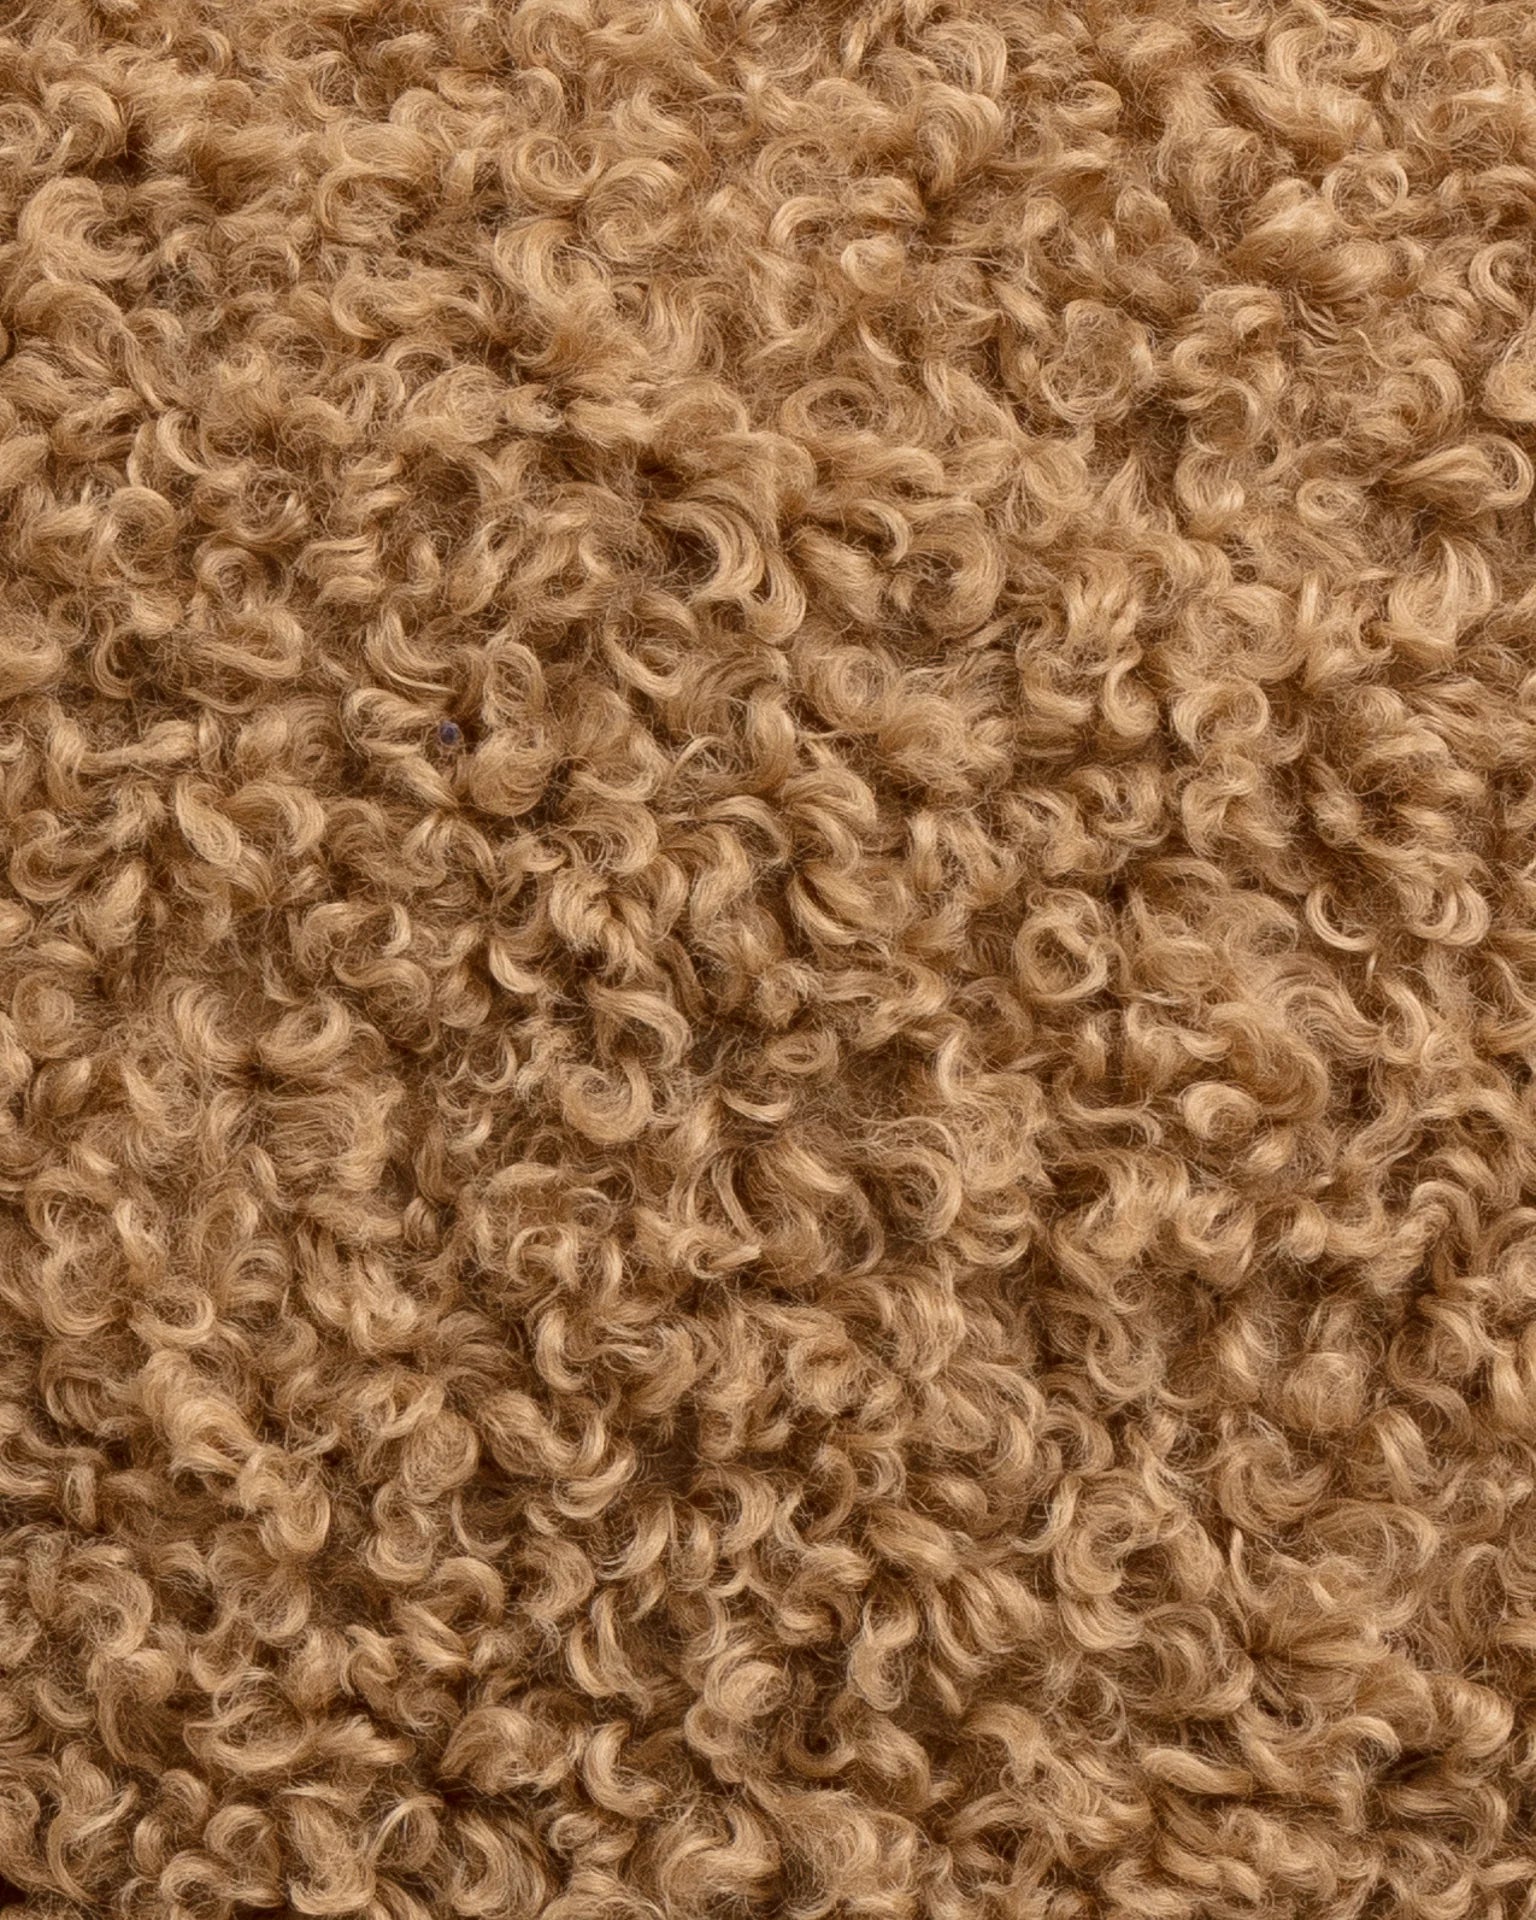 Close-up of a textured surface showing tightly curled light brown hair, depicting a dense pattern of natural curls in Scottsdale, Arizona using the Gabby Curly Camel Pillow 26x26.